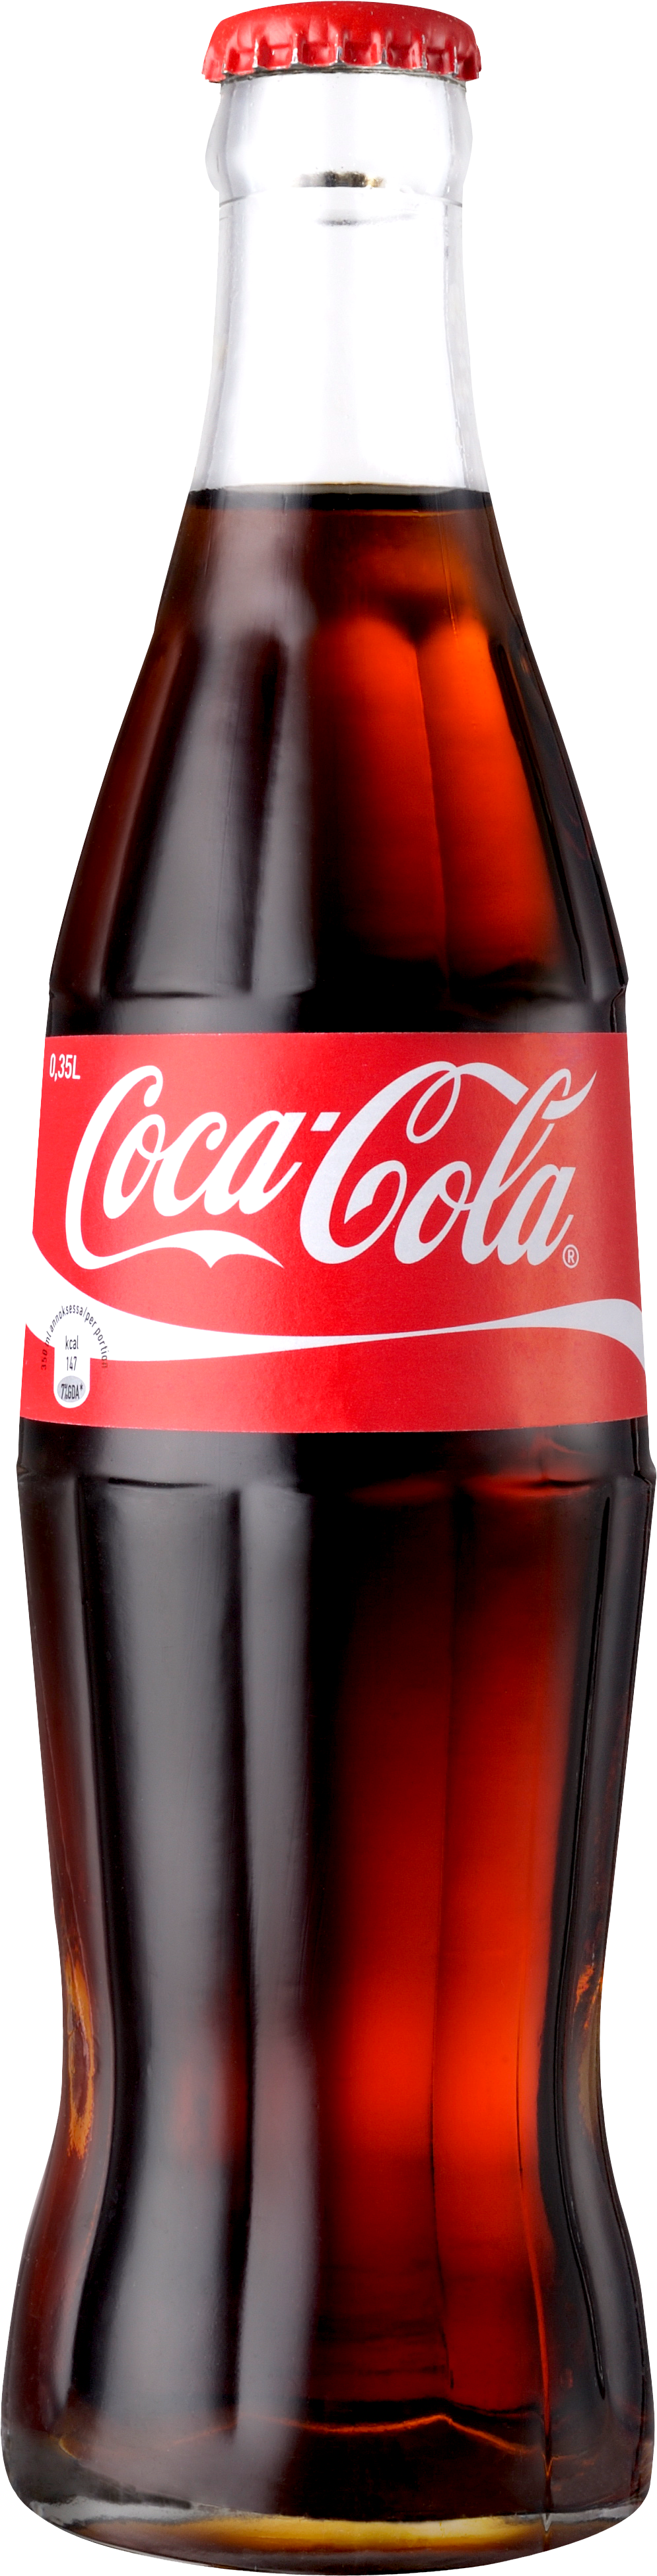 Coca Cola Png Image - Coca Cola Bottle Chilled (250x935), Png Download